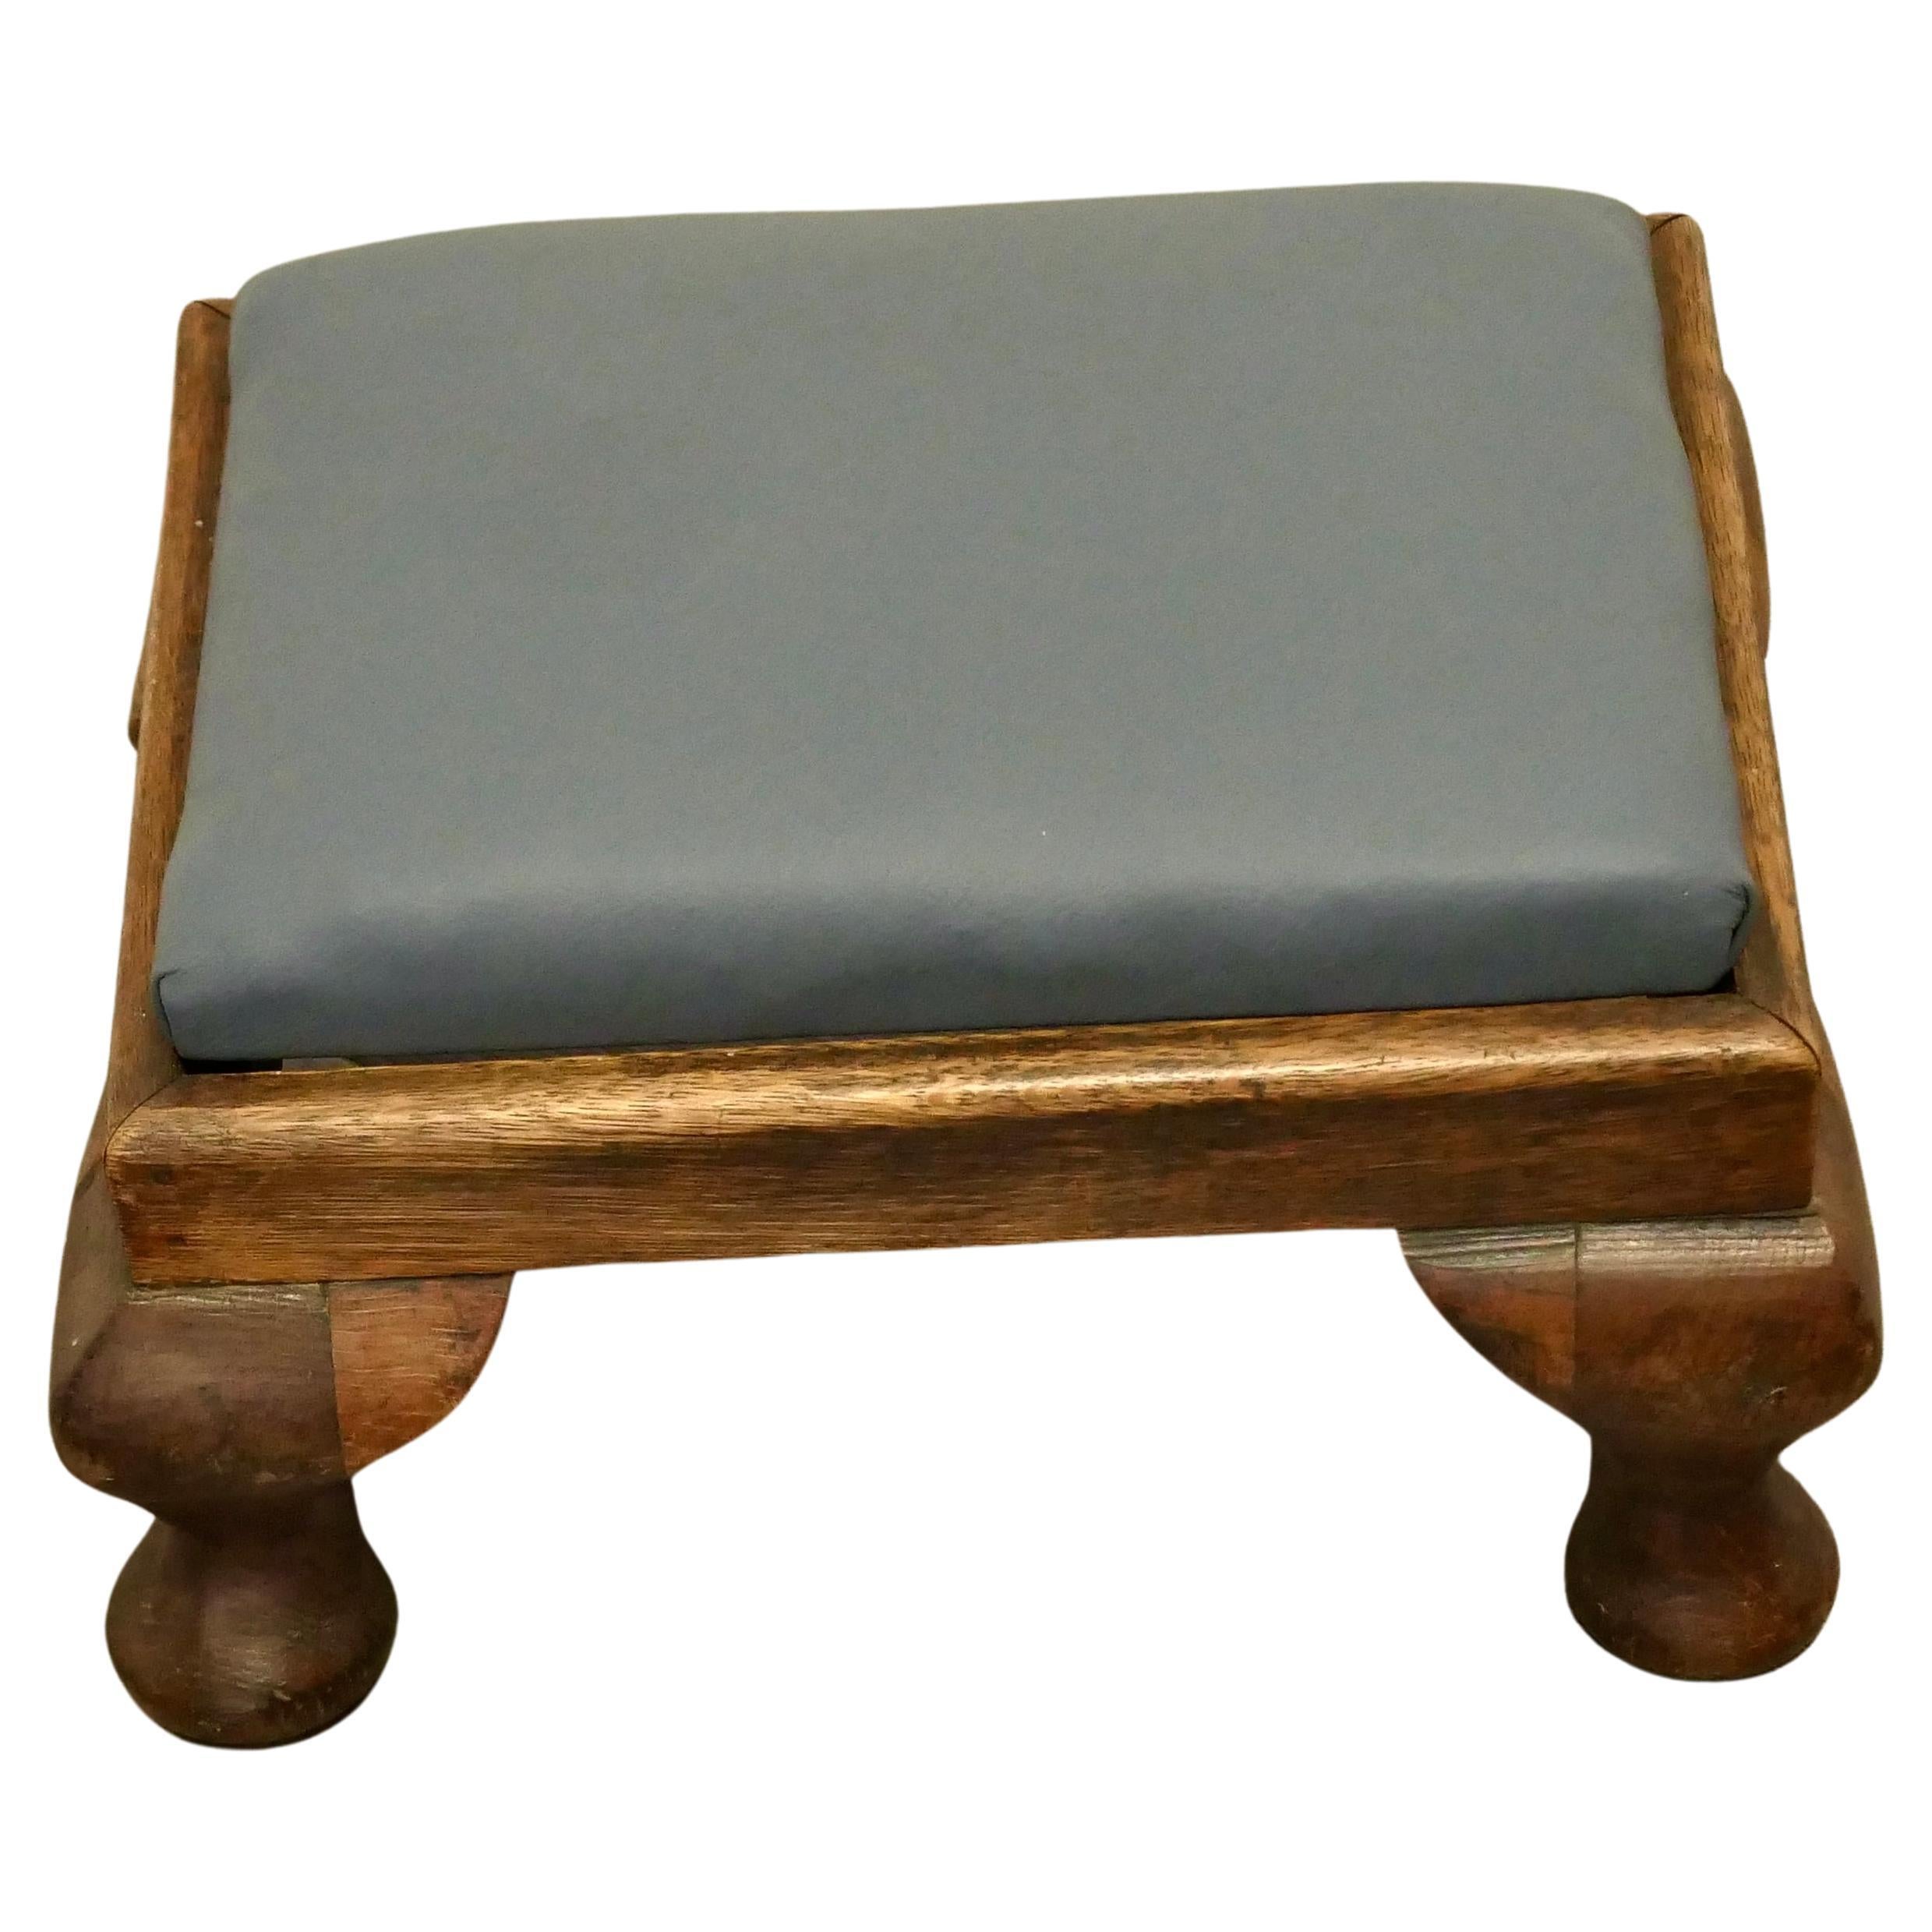 Victorian Country House Oak Foot Stool Upholstered in Soft Leather    